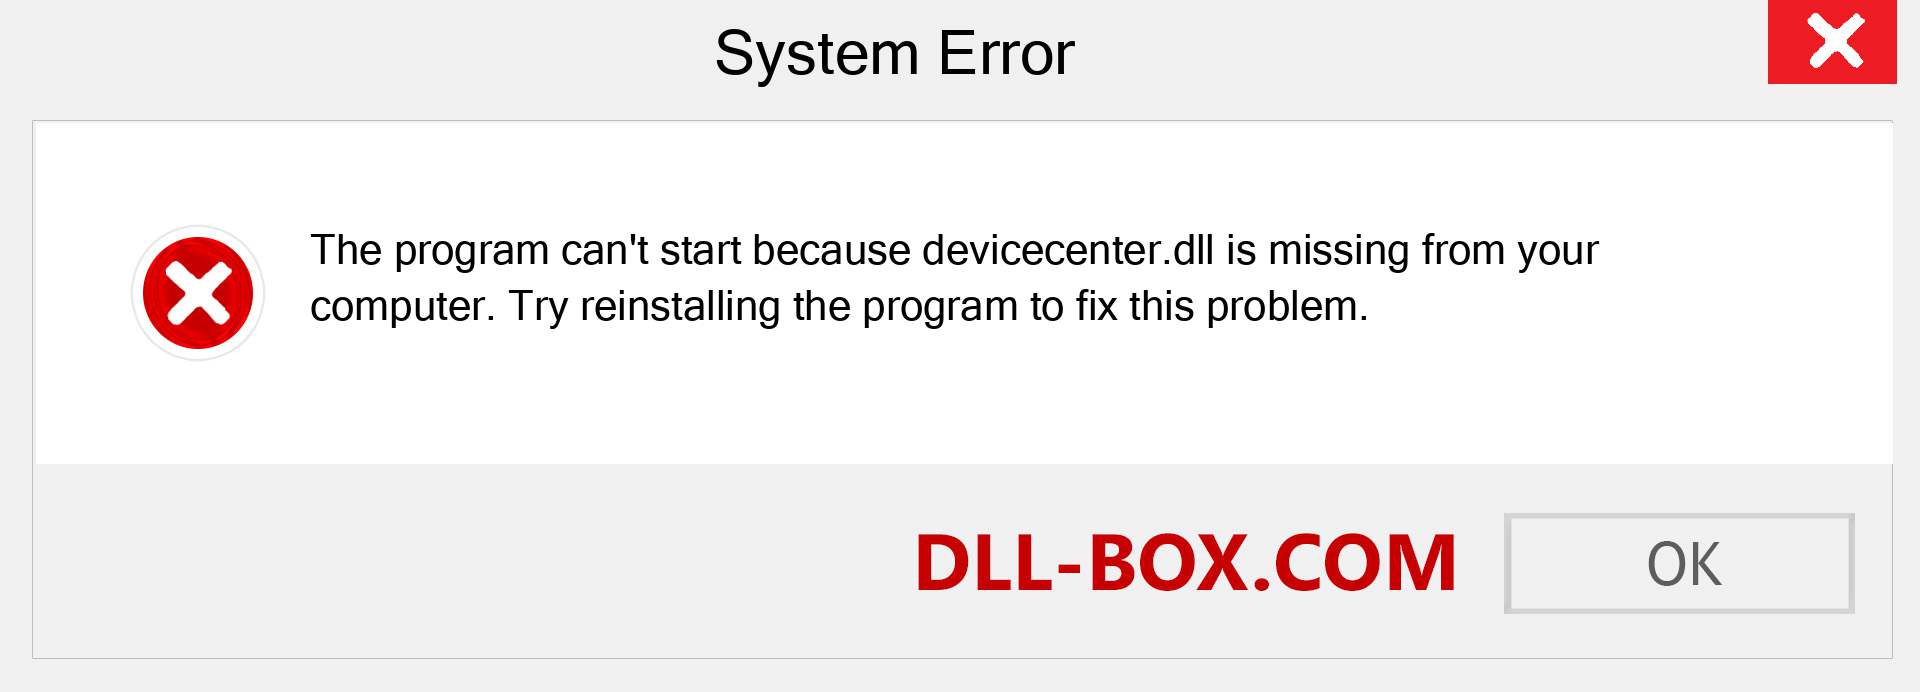  devicecenter.dll file is missing?. Download for Windows 7, 8, 10 - Fix  devicecenter dll Missing Error on Windows, photos, images